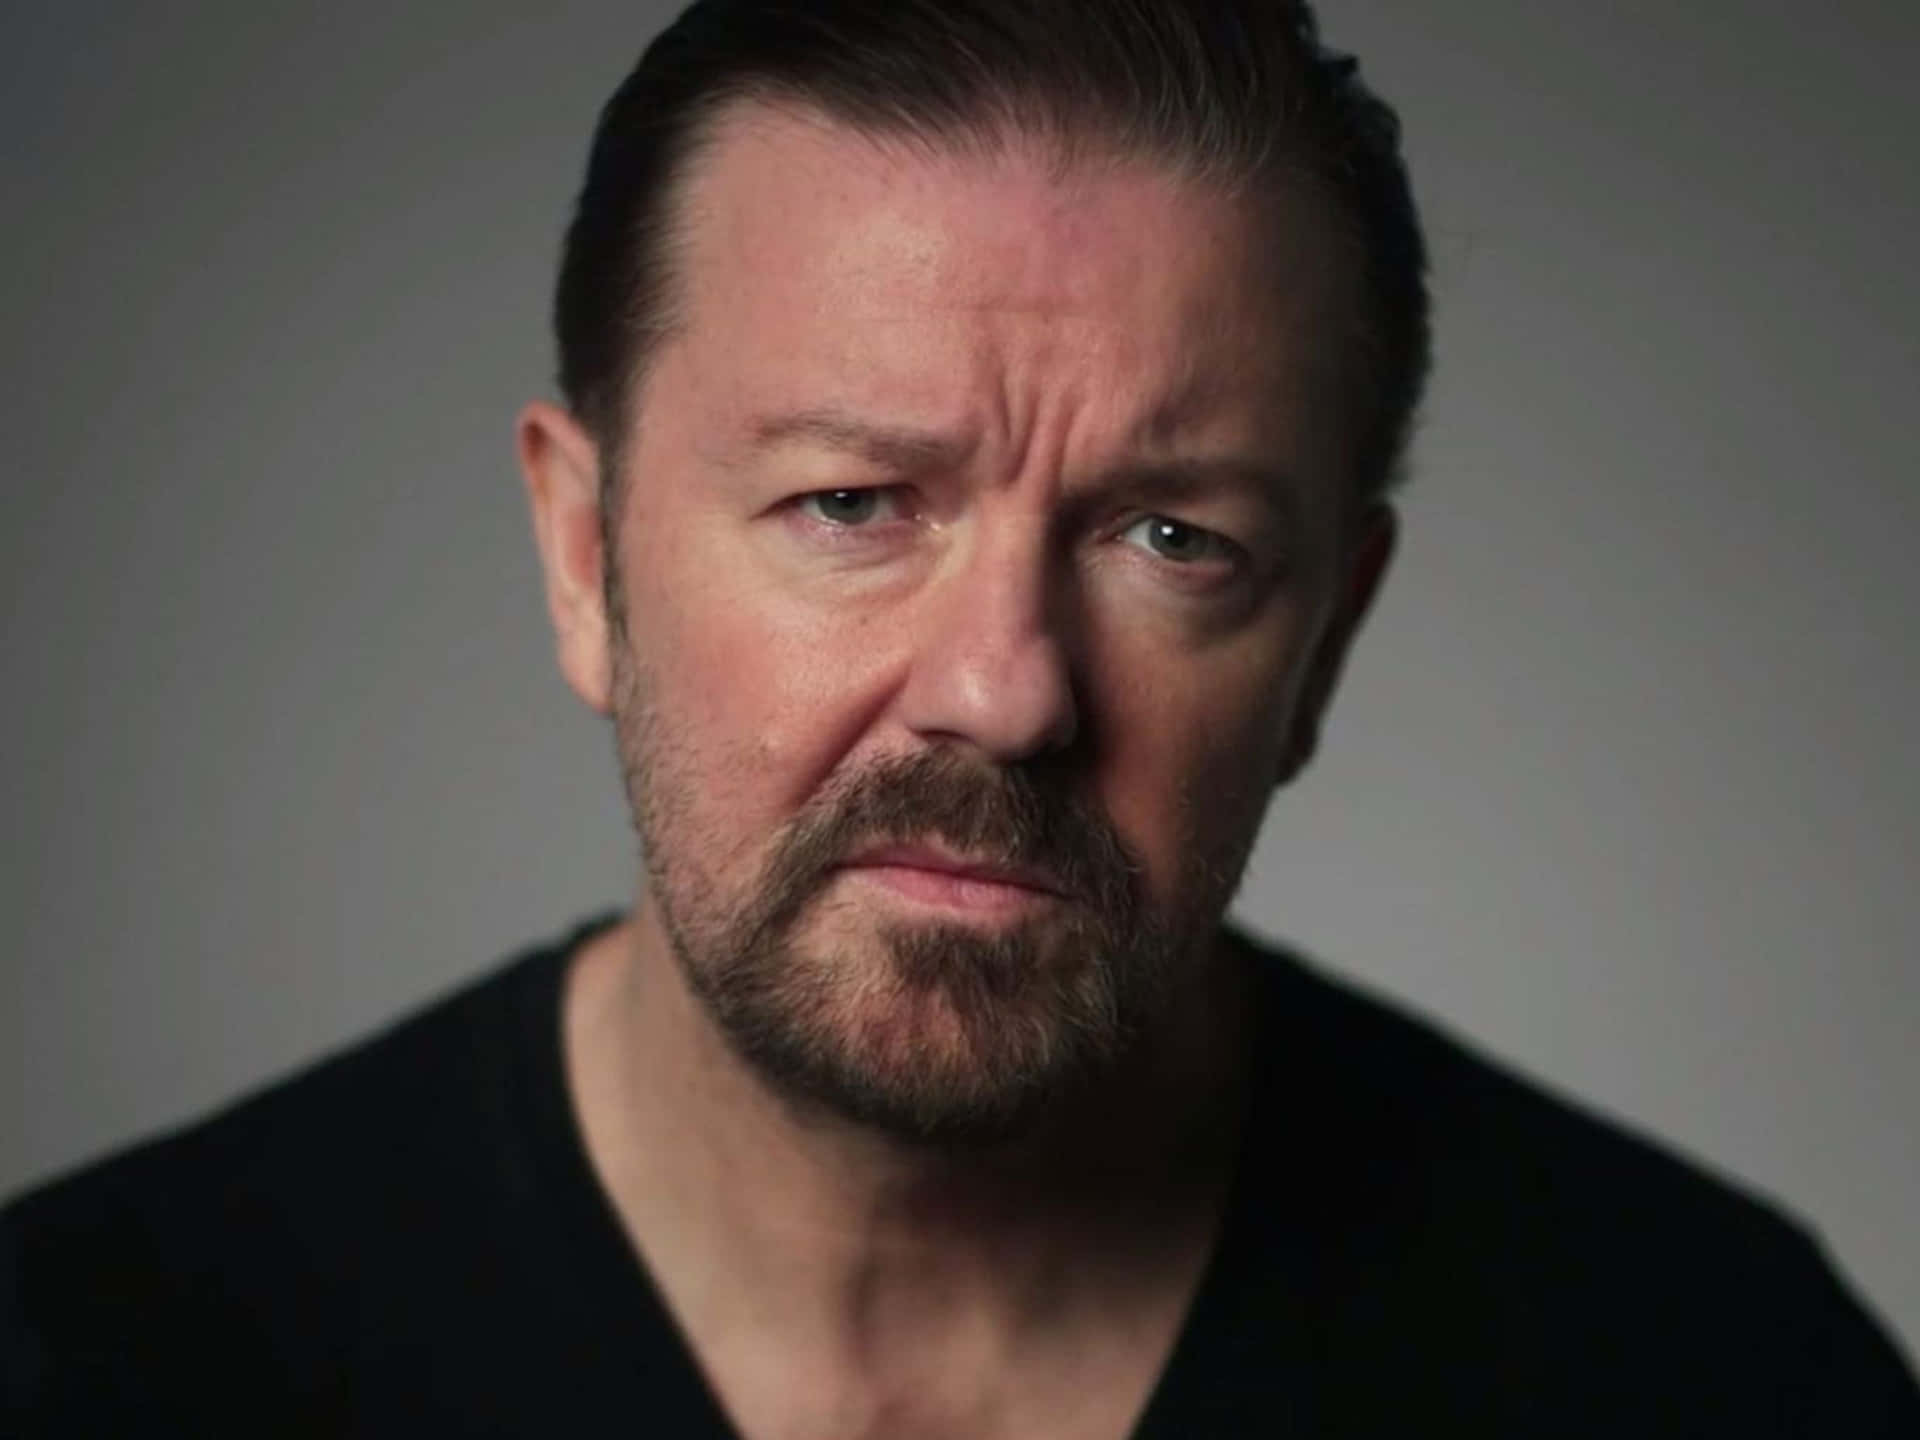 Ricky Gervais at the red carpet of The Golden Globes Wallpaper